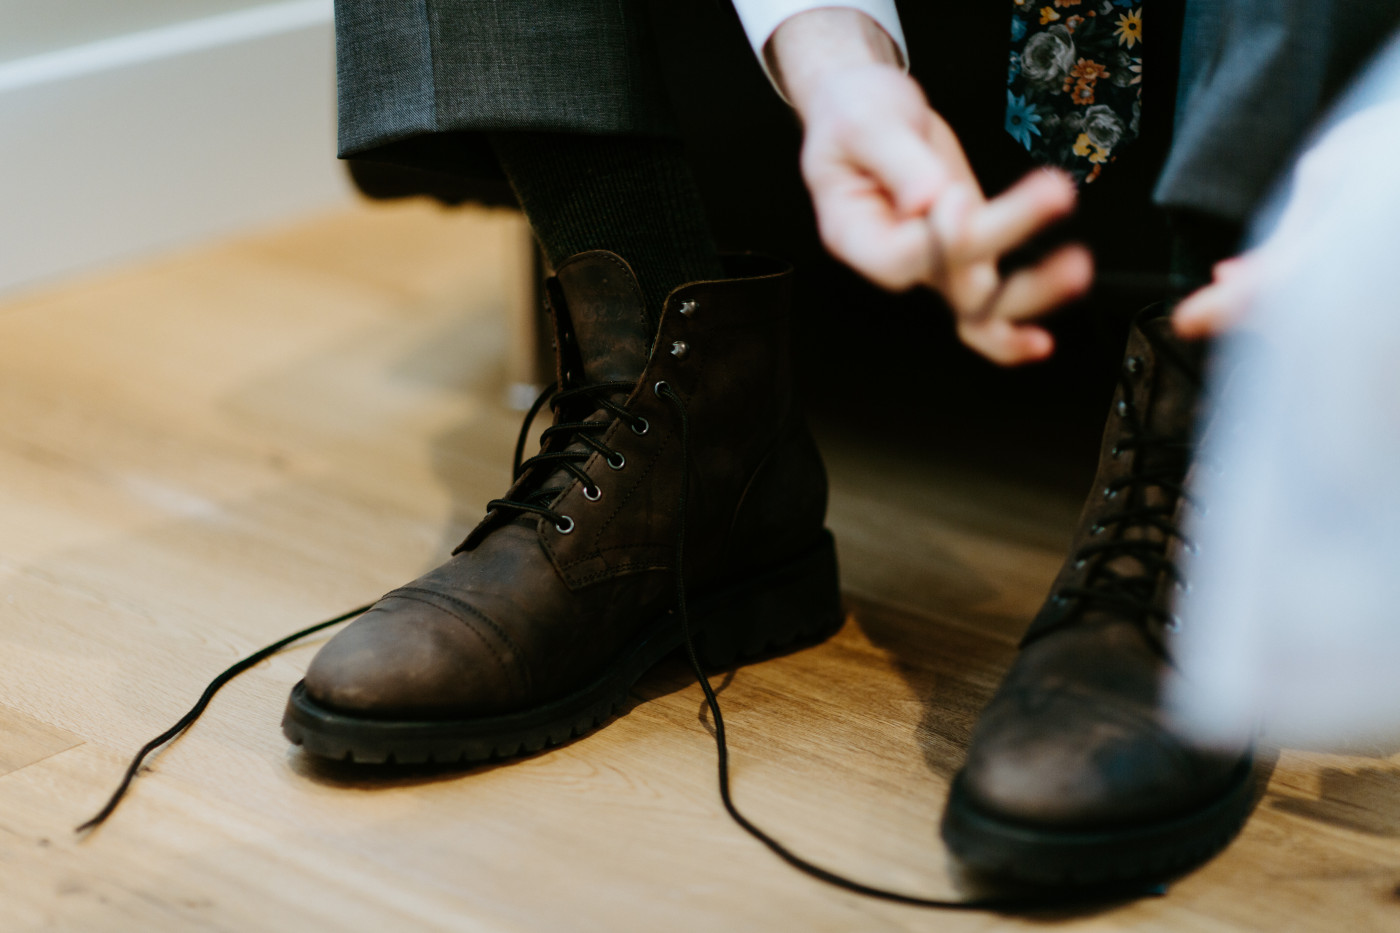 Lennie puts on his shoes. Elopement photography at Columbia River Gorge by Sienna Plus Josh.